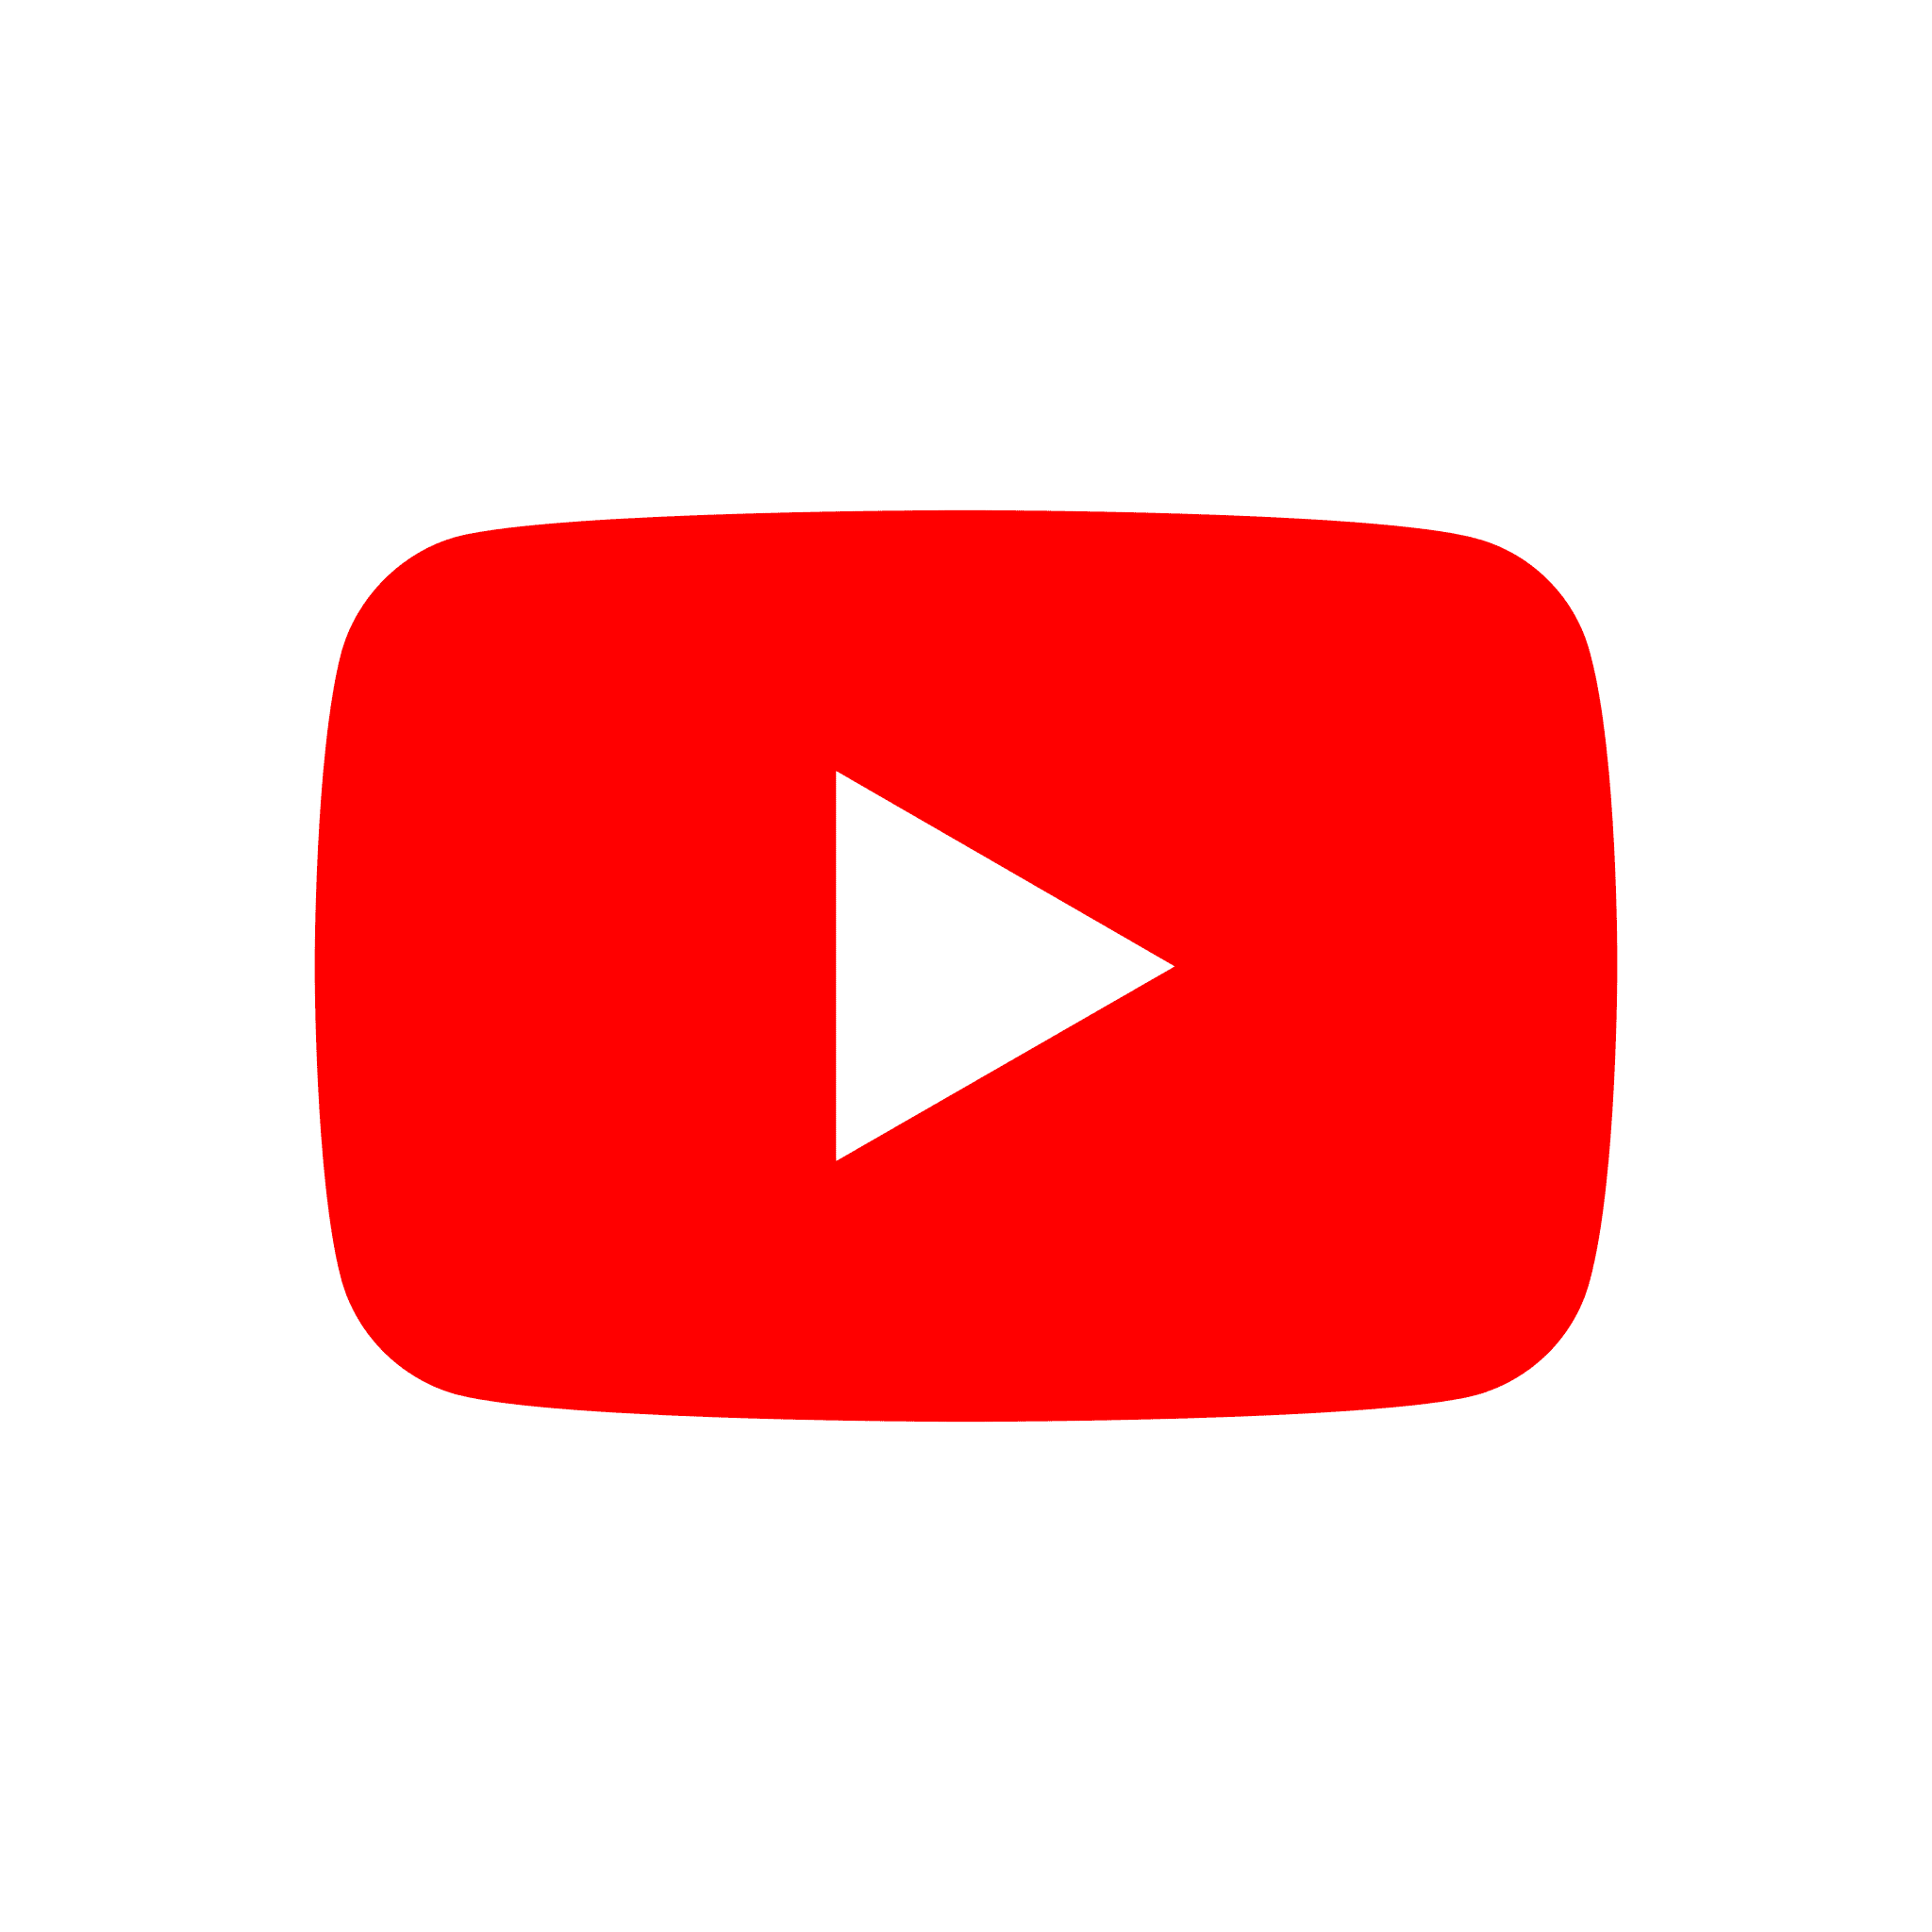 Youtube logo - White triangle pointing right on a red rounded rectangle